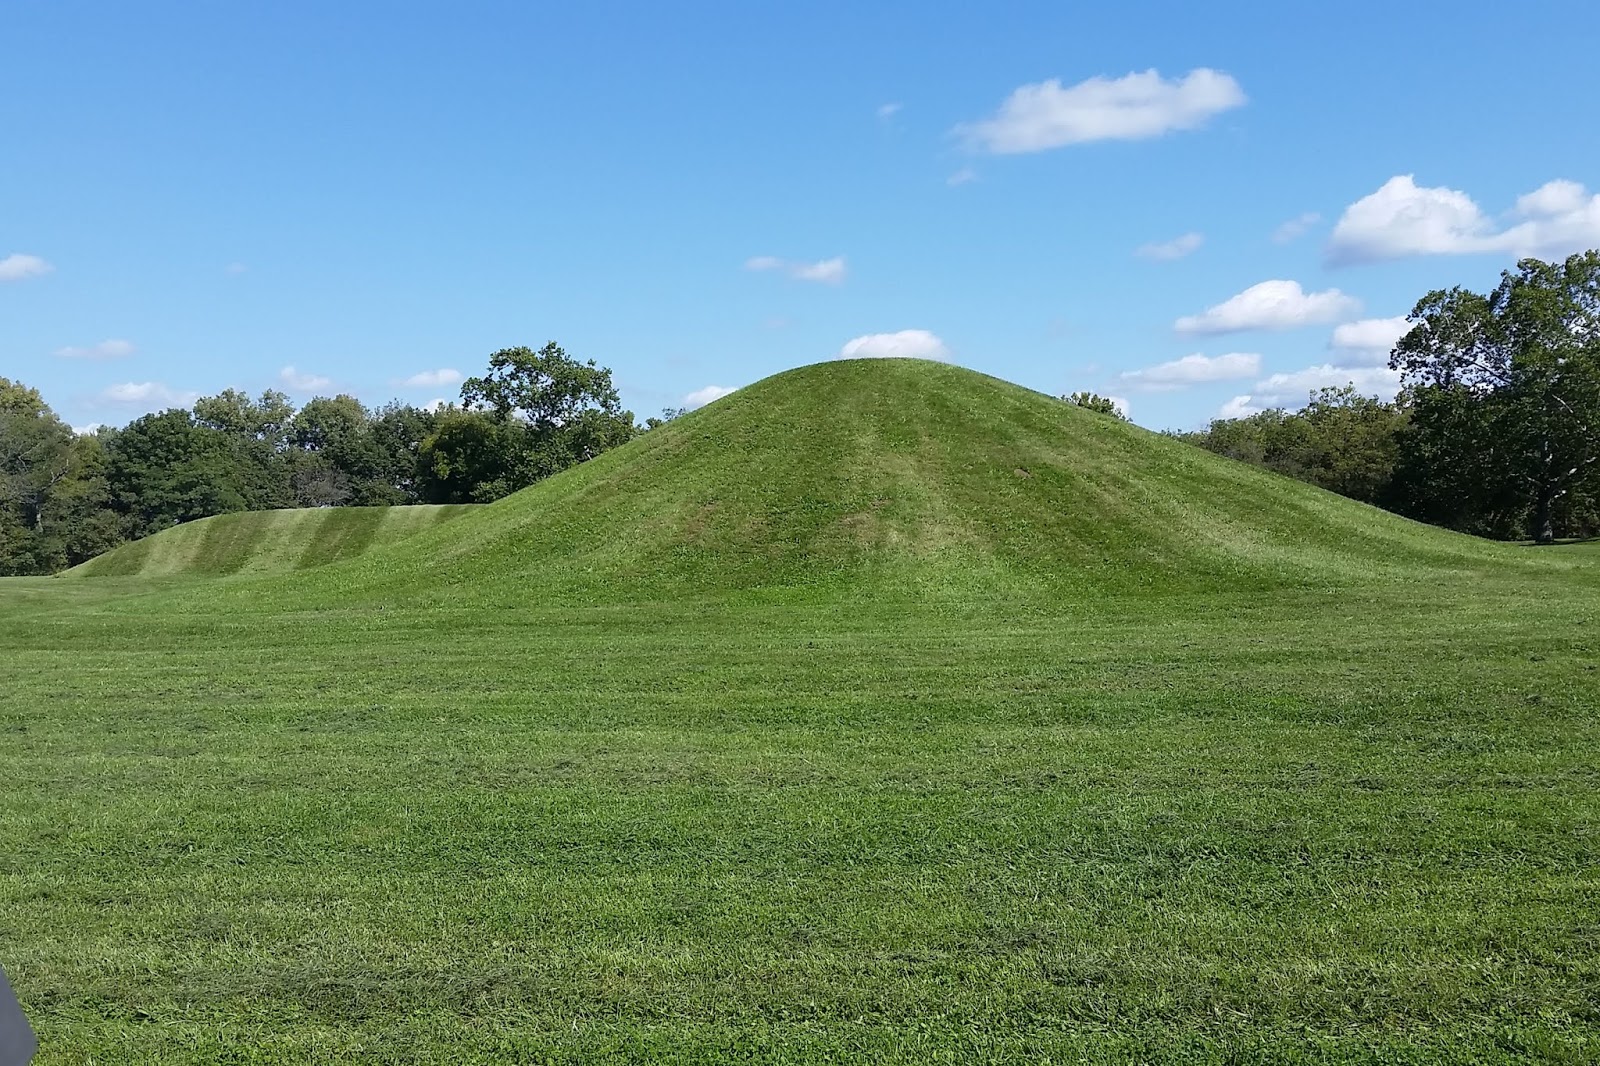 Travels and Trials of RV Life: Hopewell Culture National Historical Park